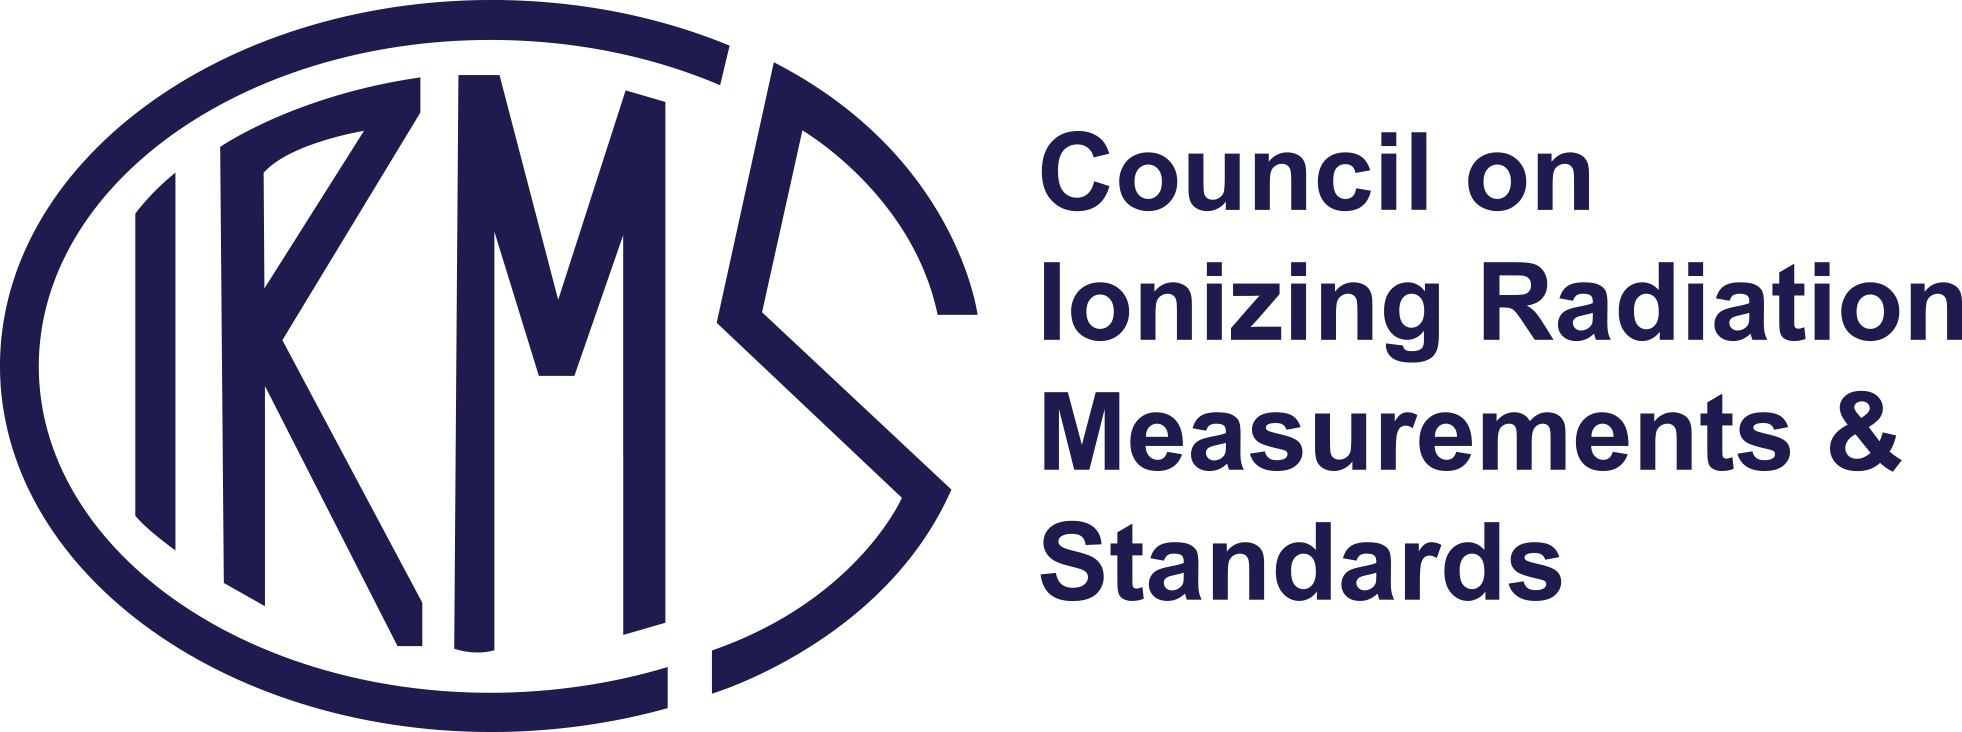 CIRMS-Council on Ionizing Radiation Measurement Standards